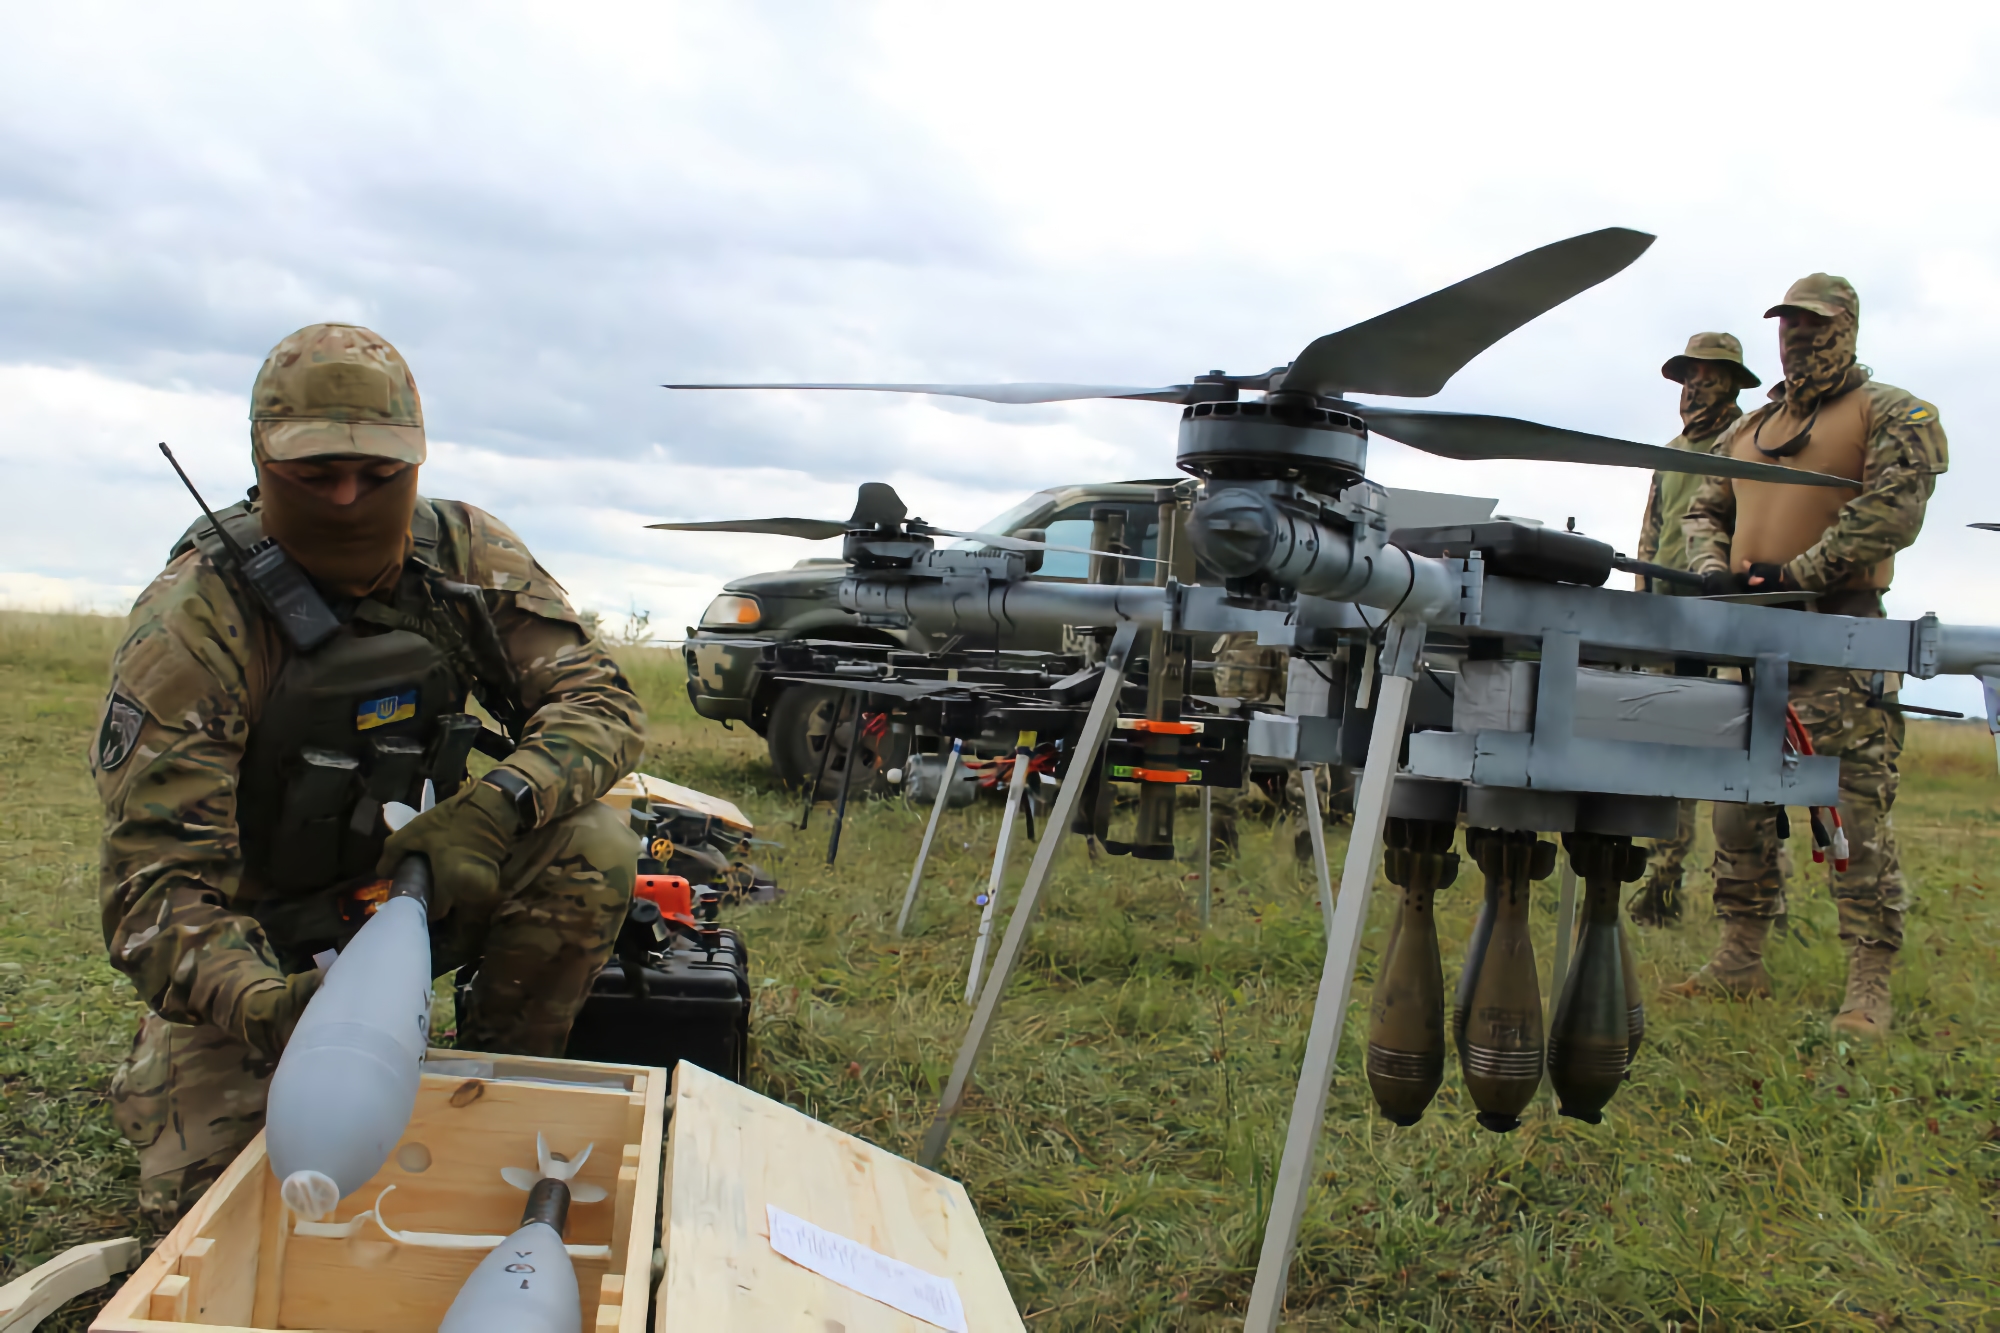 The Armed Forces received a large octocopter, which can carry up to 6 anti-tank mines